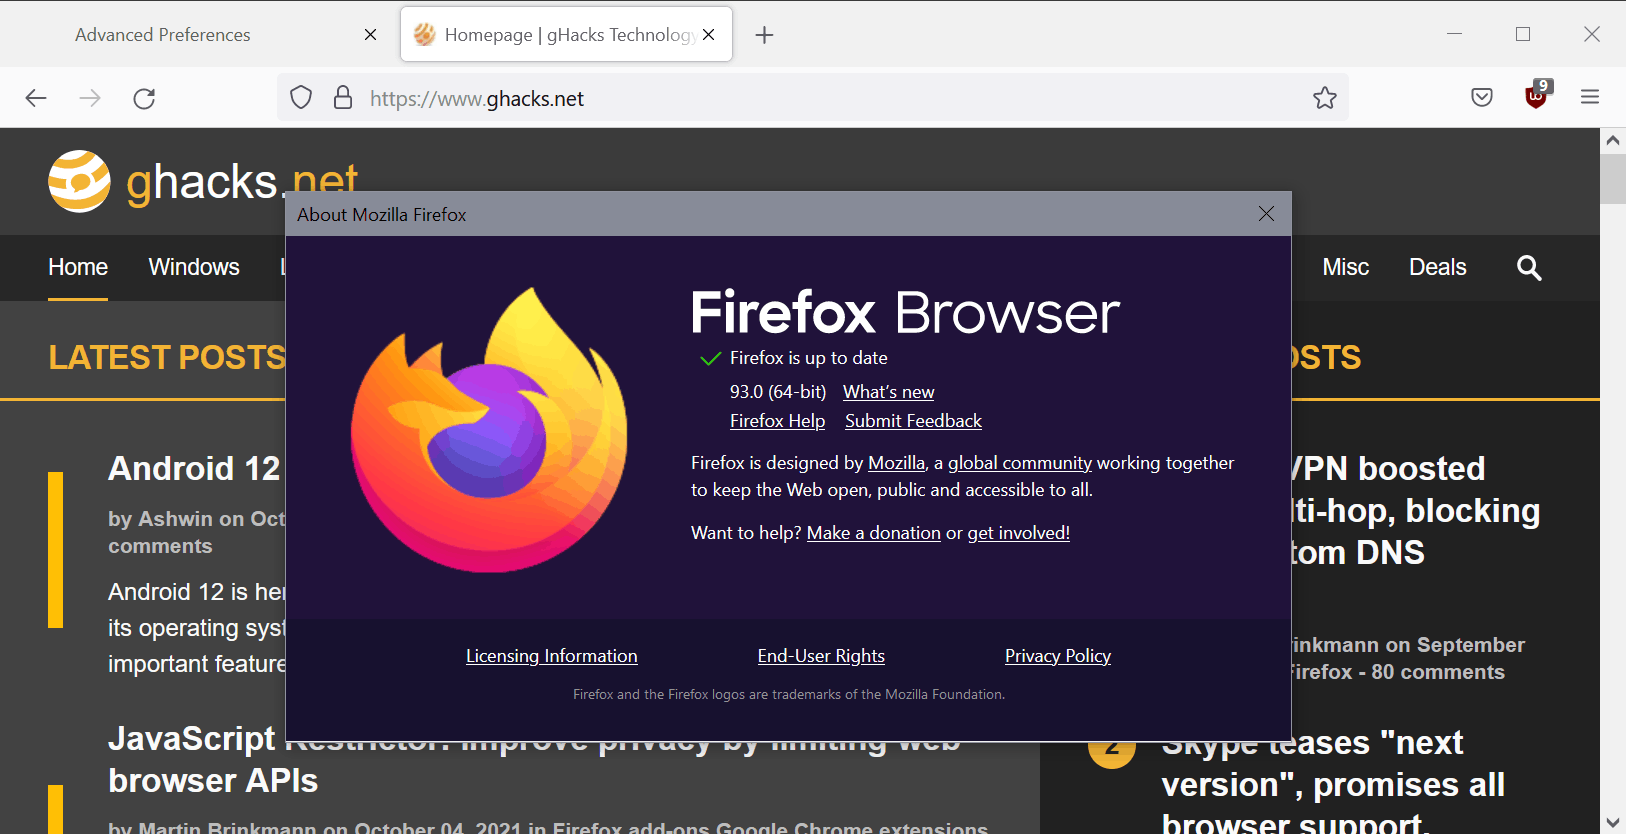 Firefox to Crack Down on In-Browser Cryptocurrency Mining